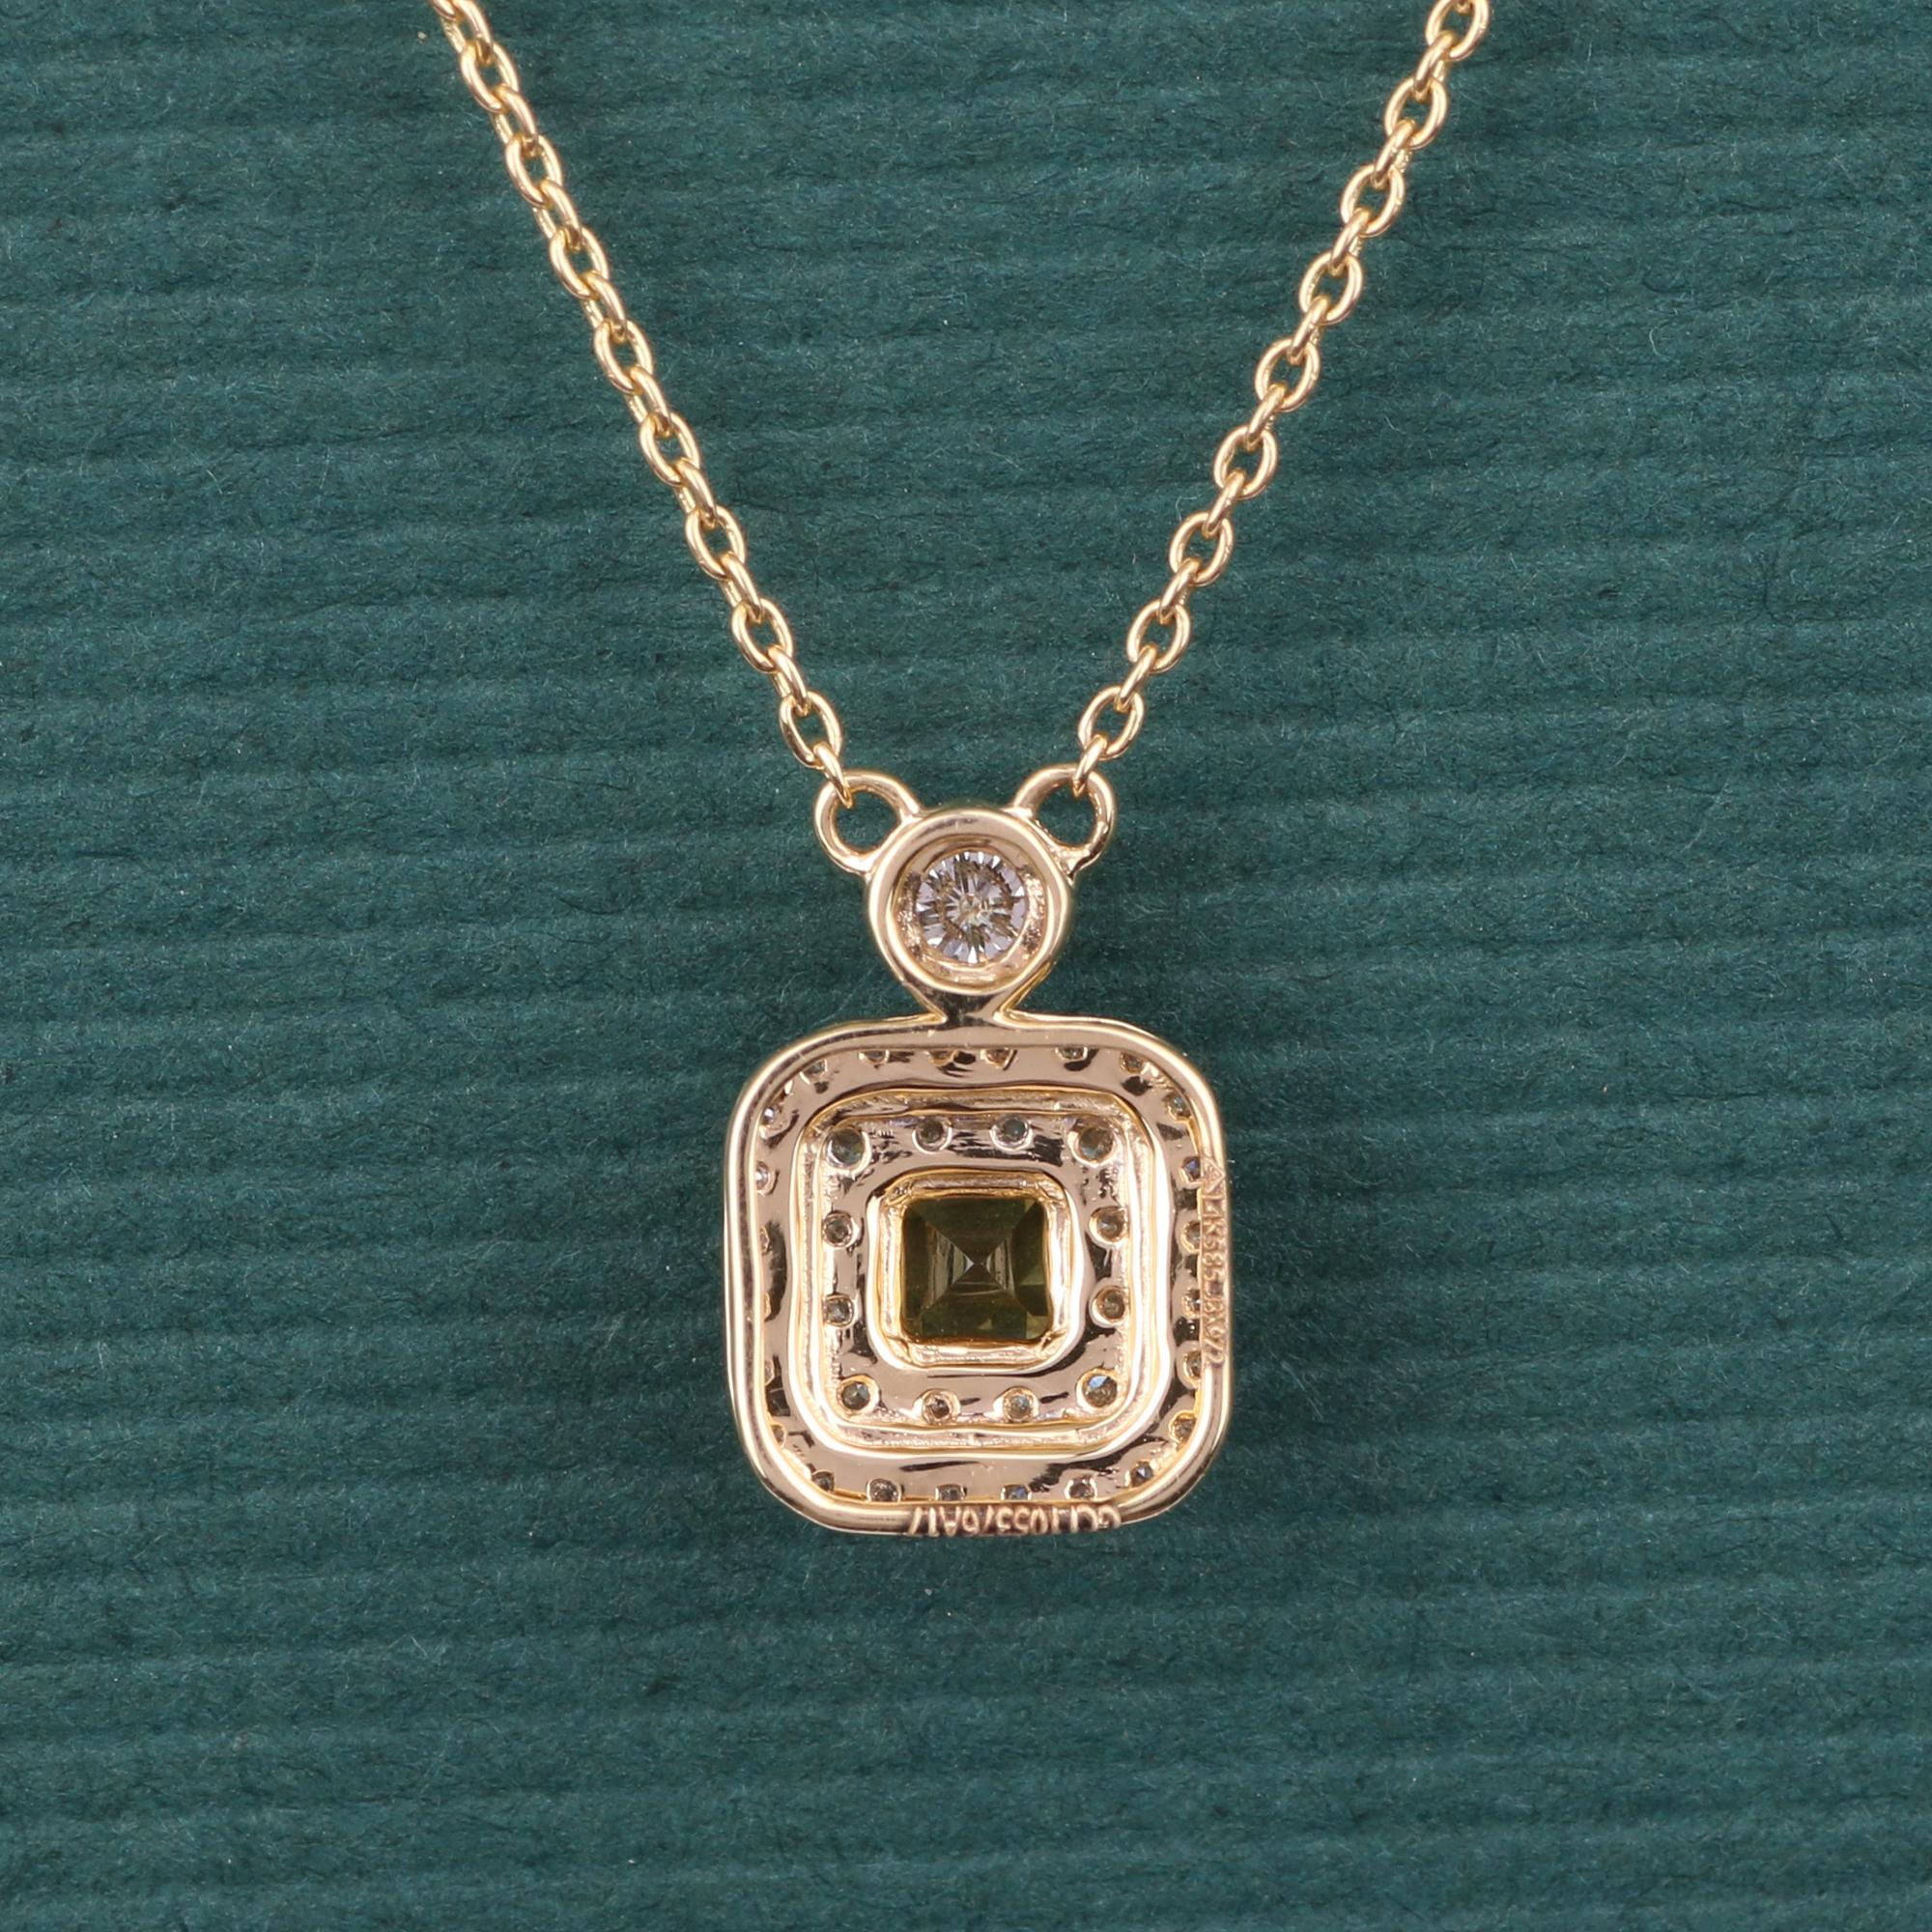 Modern 14K Yellow Gold 0.247 Ctw Natural Diamond, 0.232 Ctw Citrine Charm Necklaces For Sale